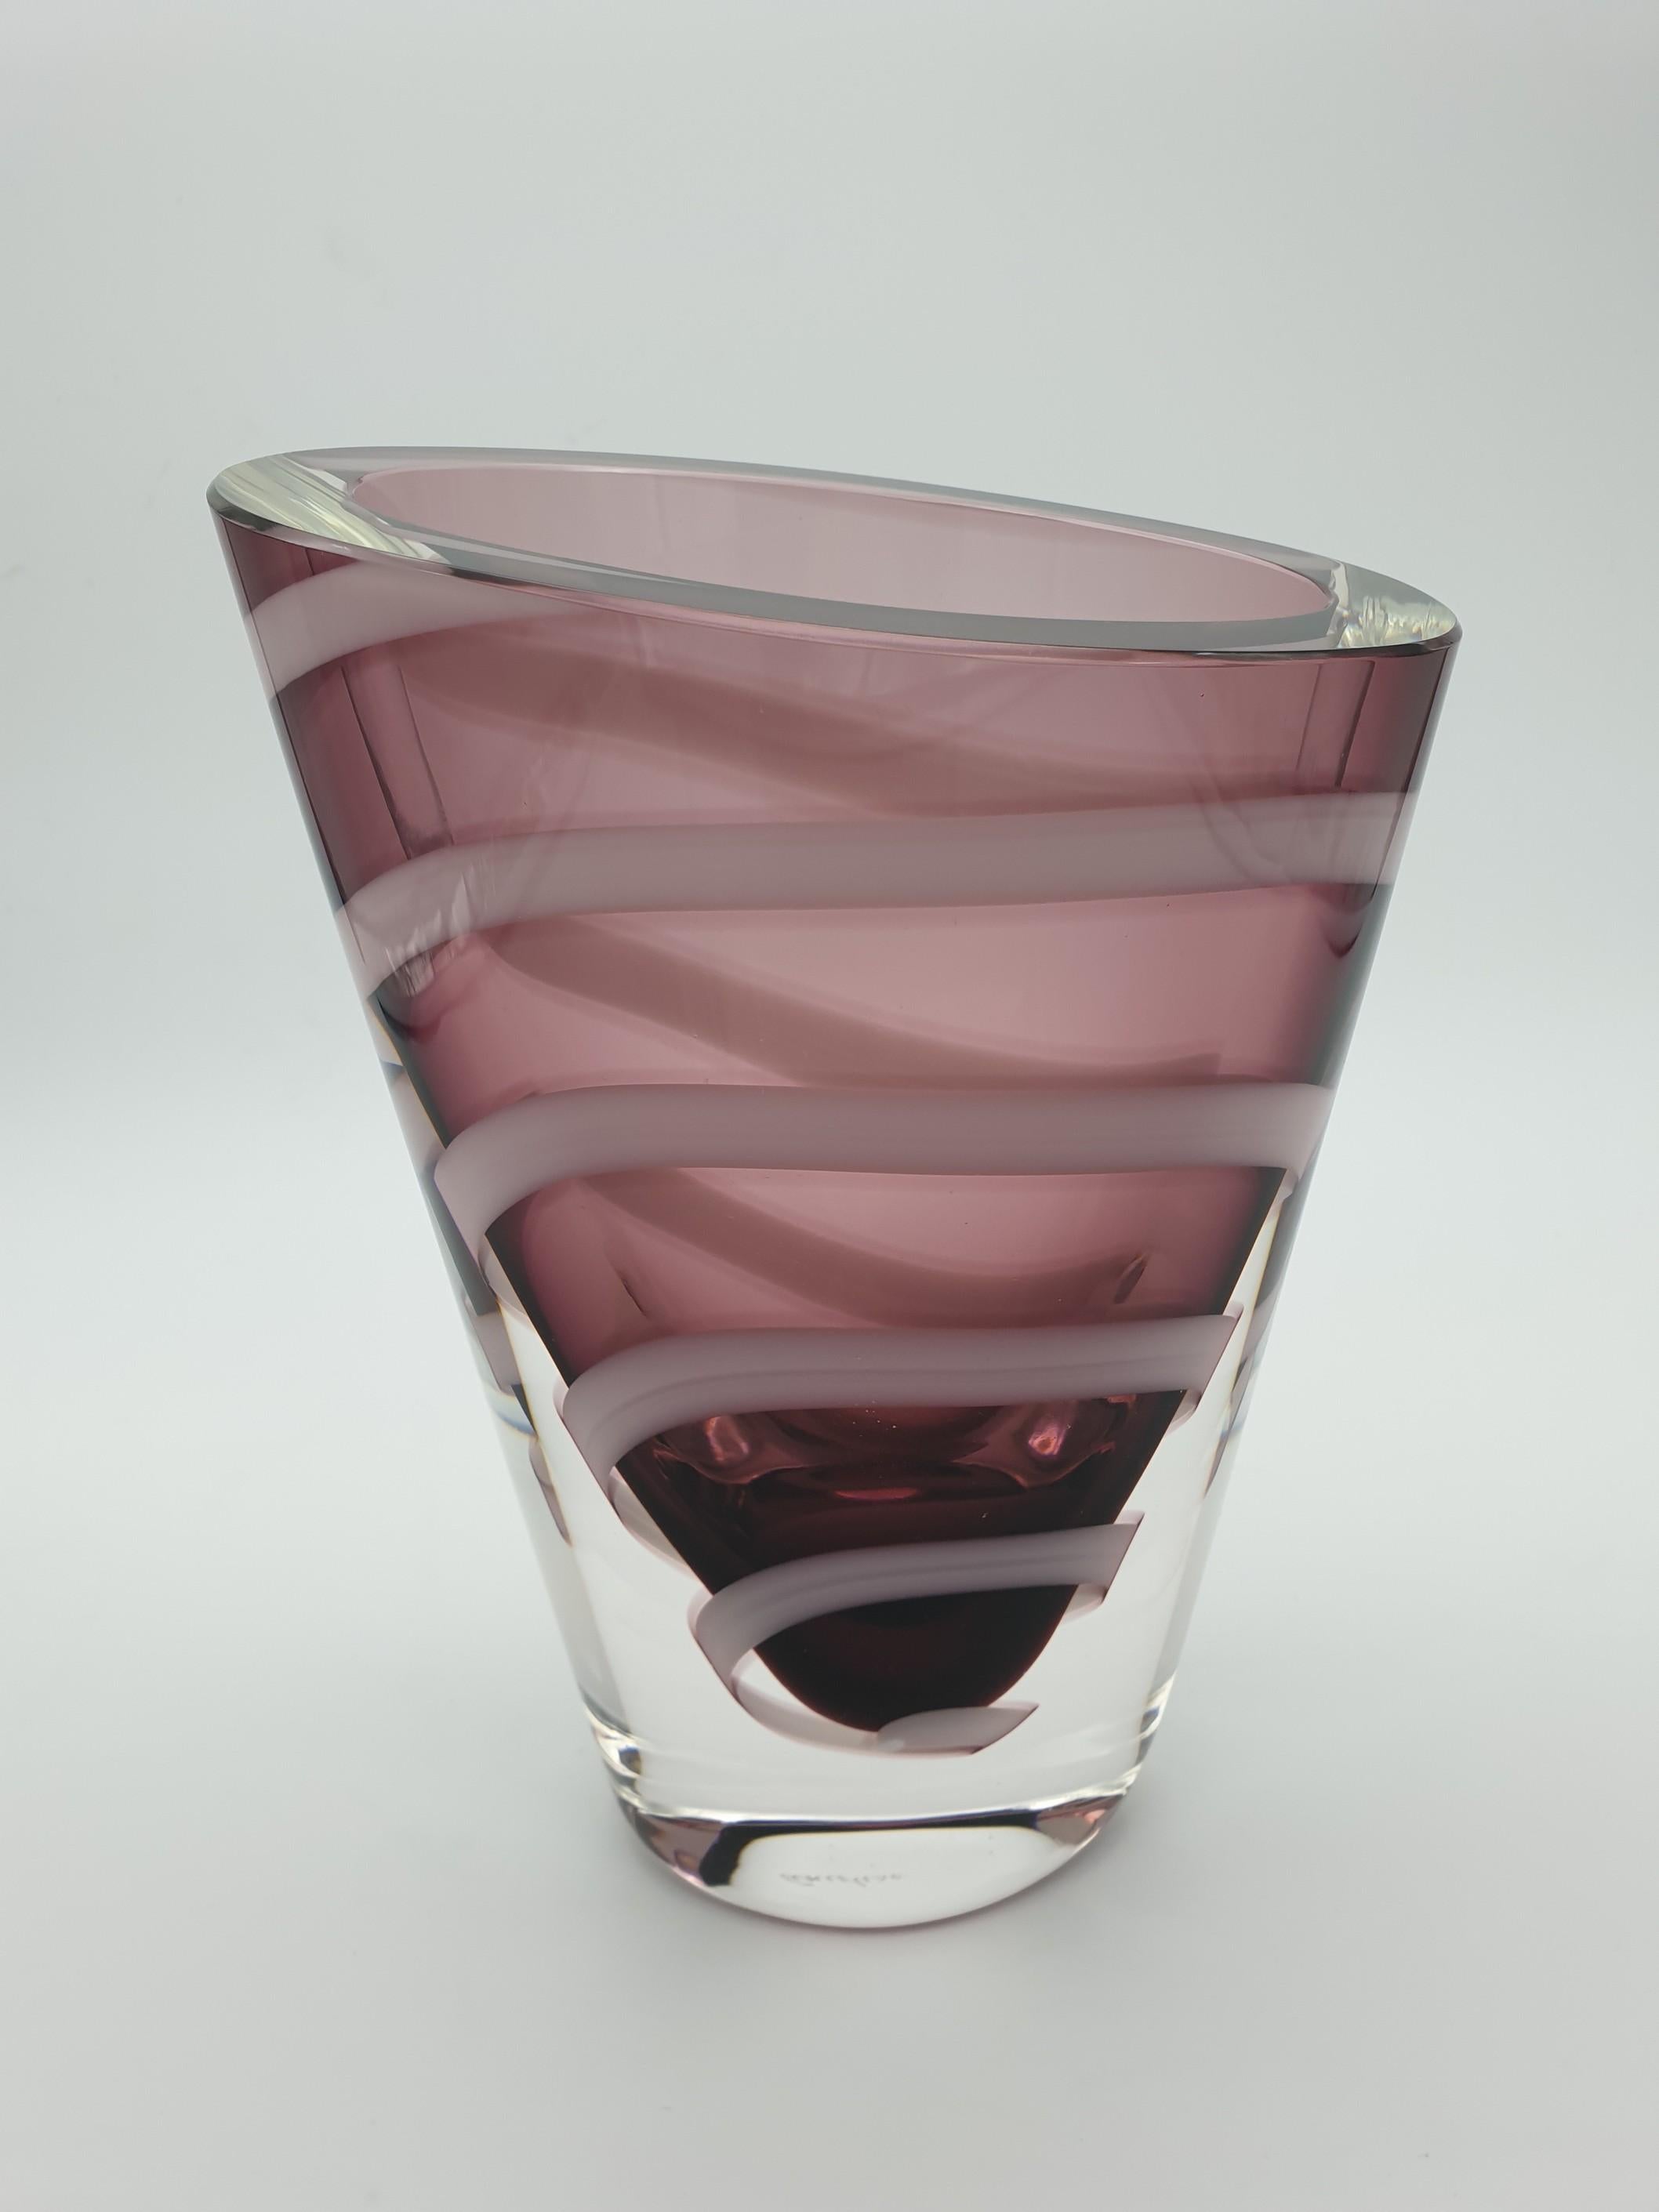 Murano glass solid vase, with thick walls and oval cross section by the glass-factory Gino Cenedese e Figlio. The ametyst color is highlighted by a contrasting milky white spiral. The geometry and dynamism in this vase is impressive: the spiralling